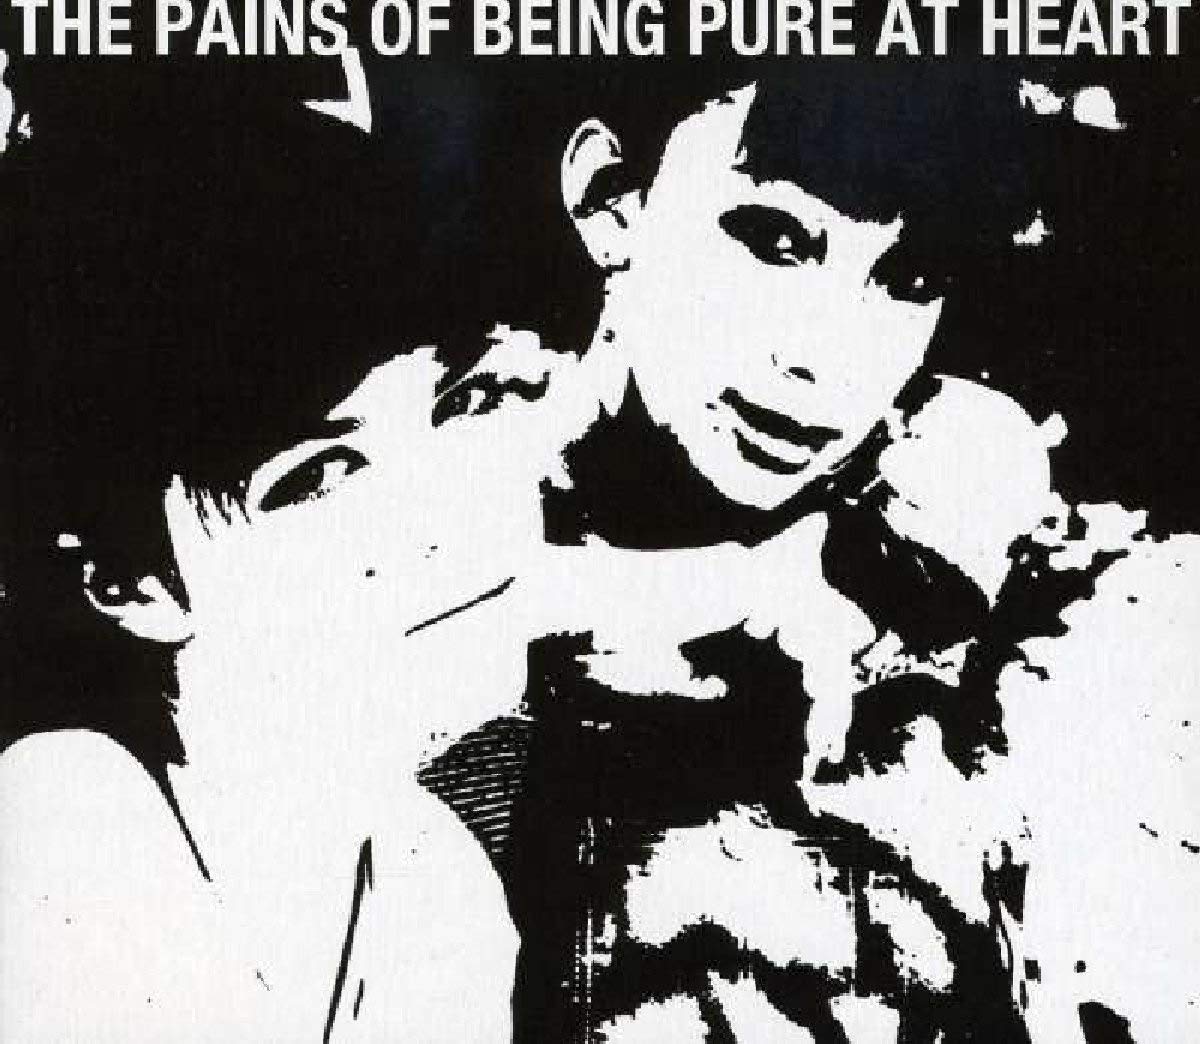 The Pains Of Being Pure At Heart - s/t  USED CD